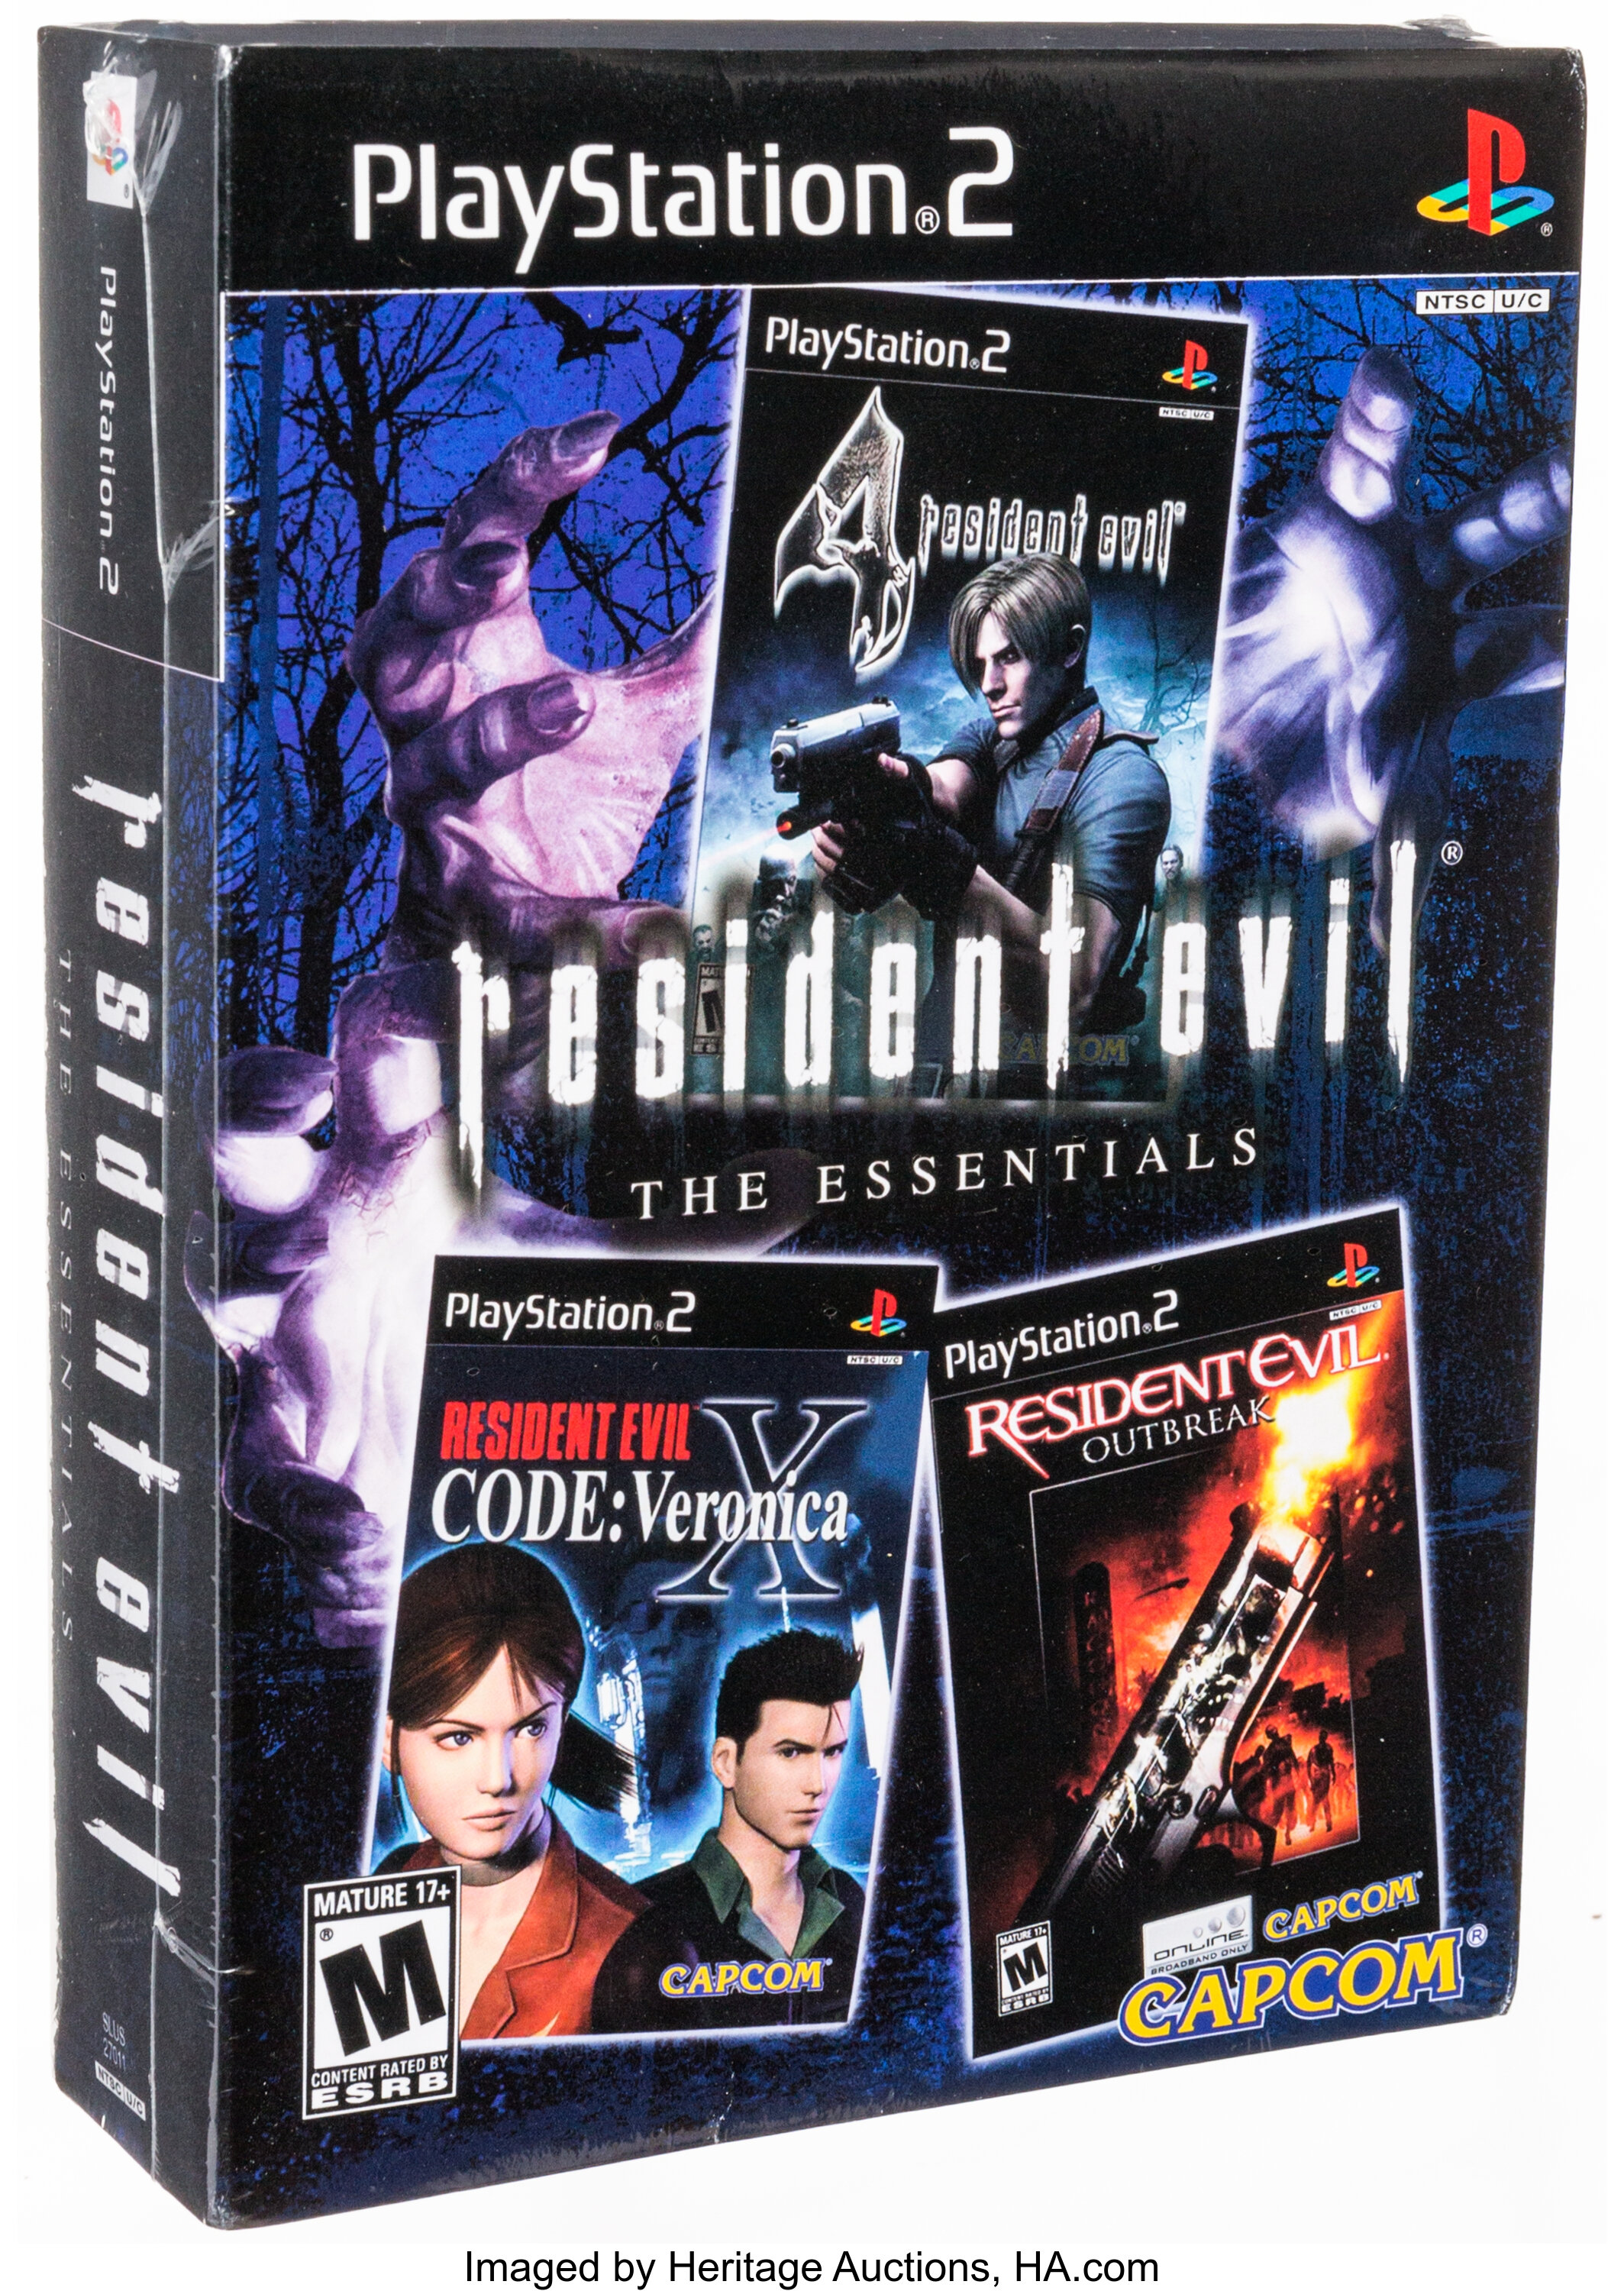 Resident Evil: The Next-Gen Essentials PlayStation 3 Box Art Cover by  Vic1293